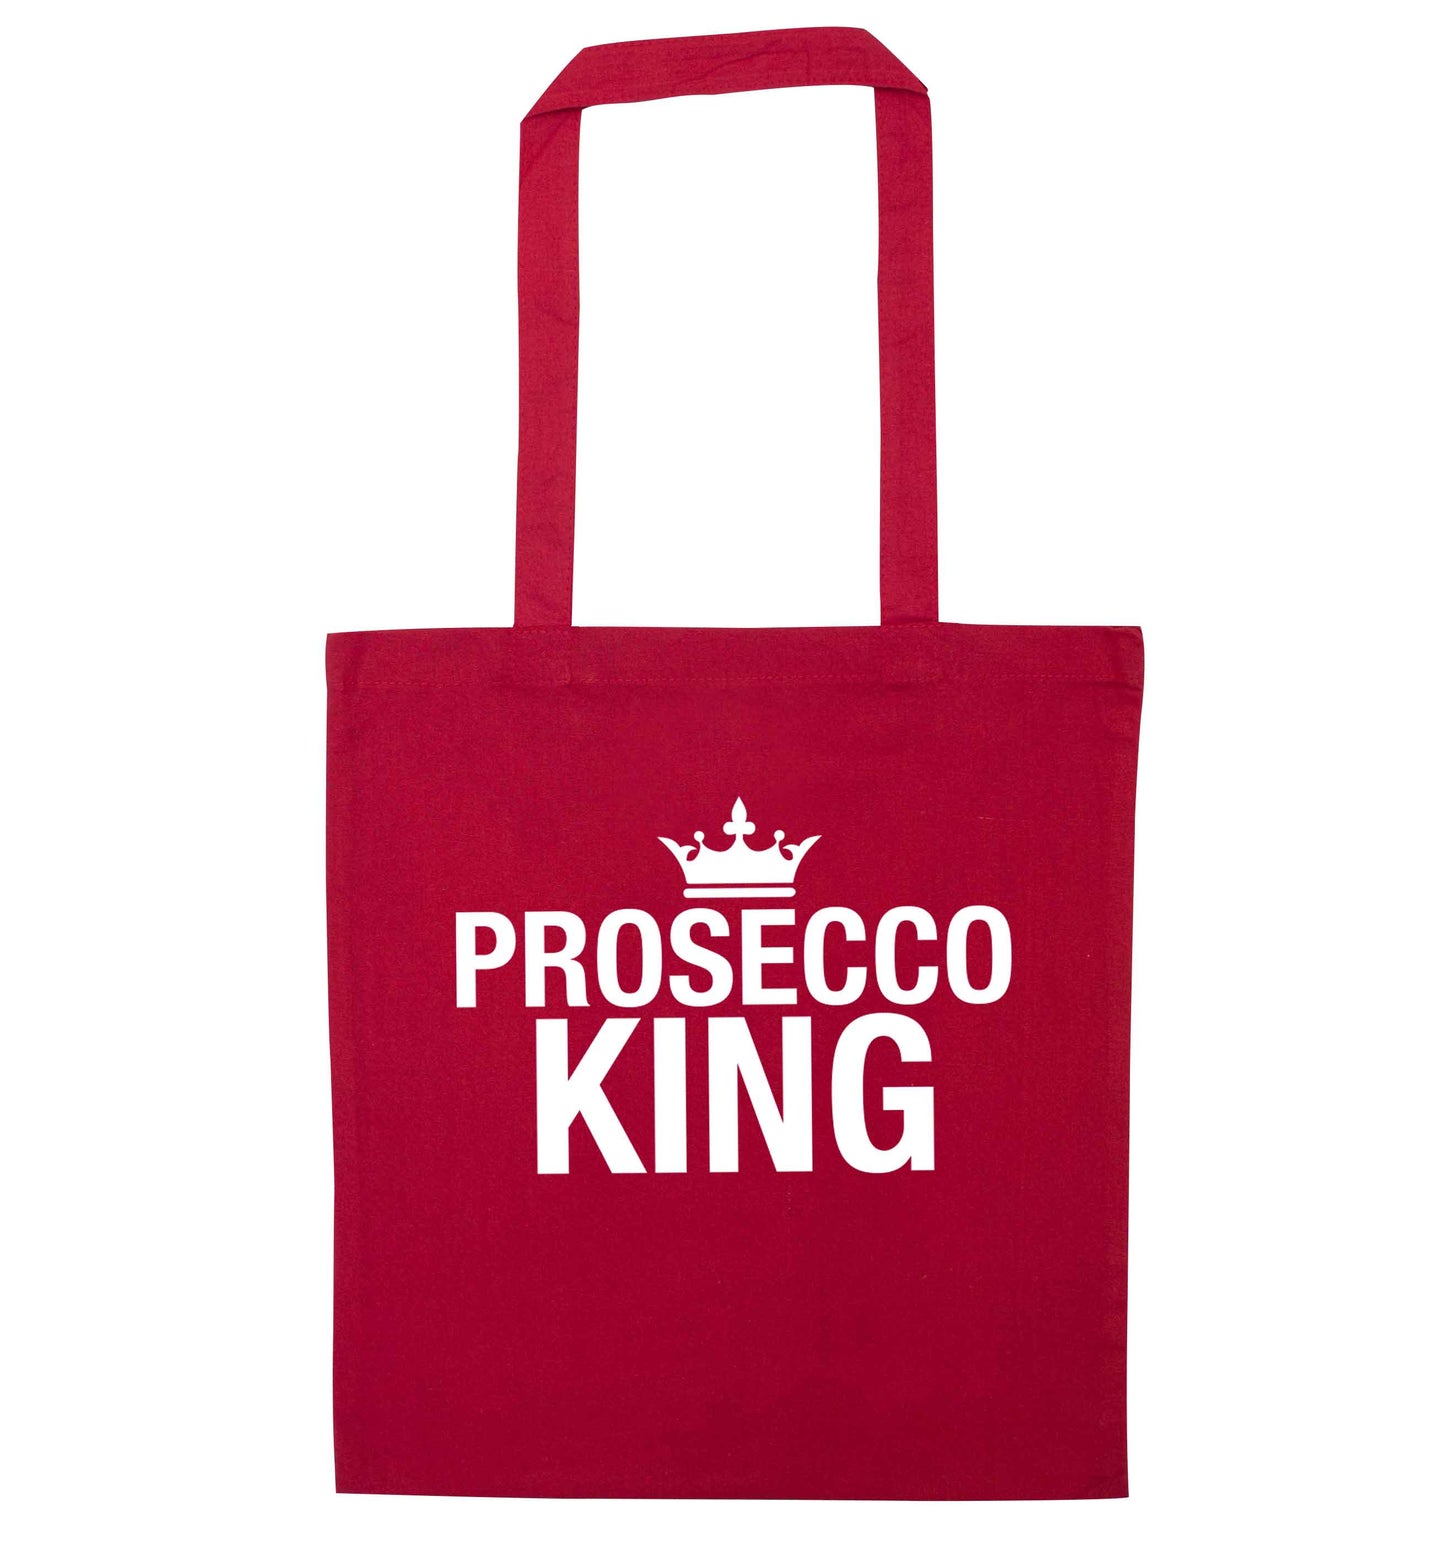 Prosecco king red tote bag